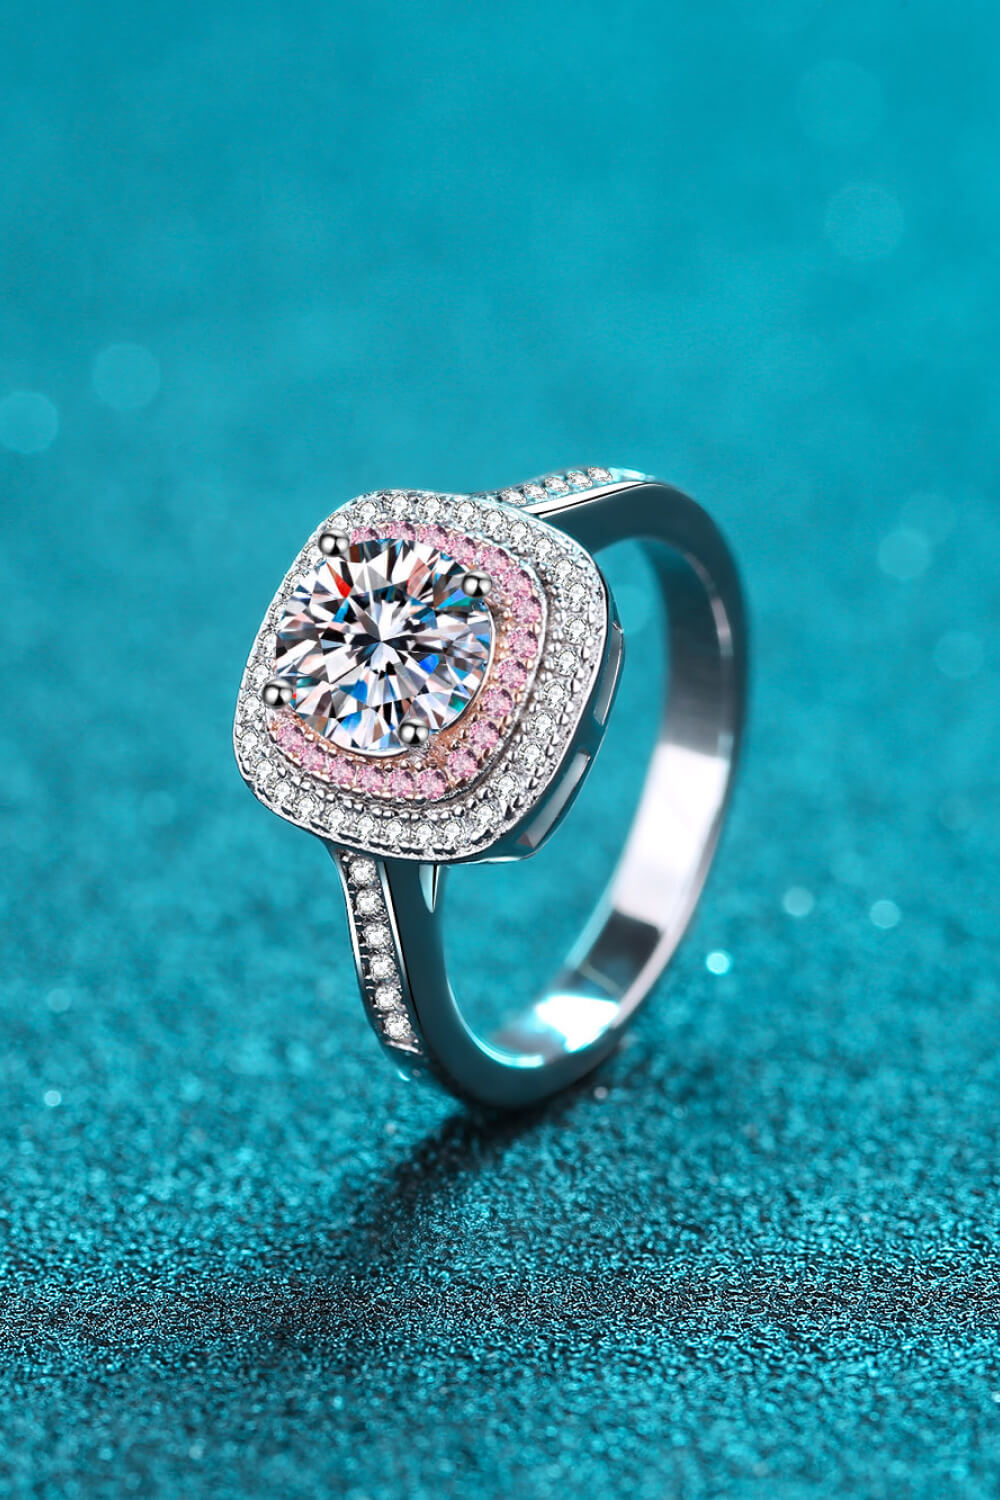 Need You Now Moissanite Ring - Tophatter Deals